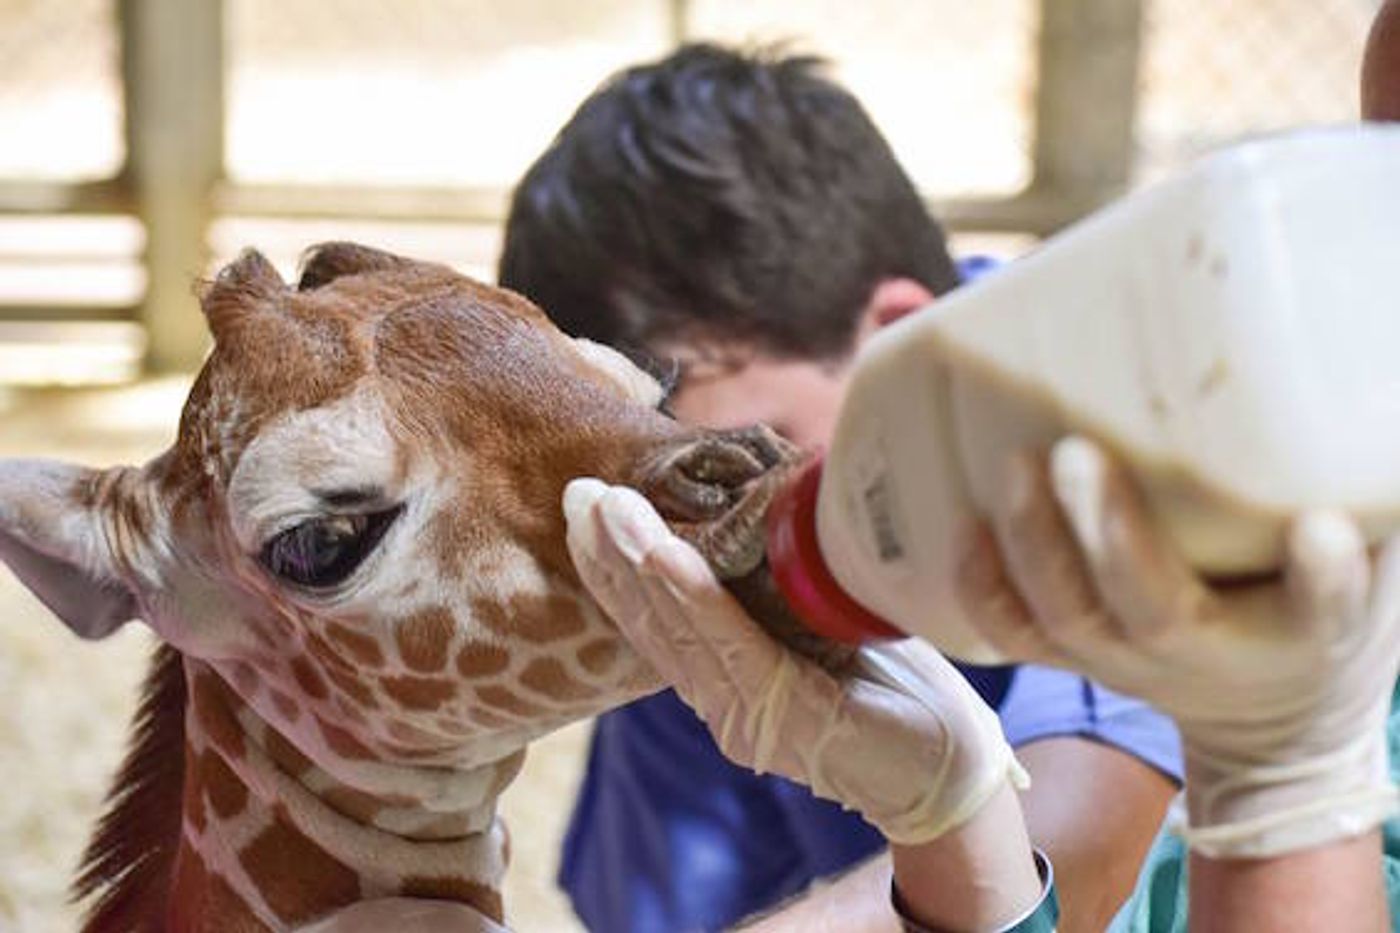 Veterinarians and park staff work to feed Julius formula from a bottle manually in the face of declining health.